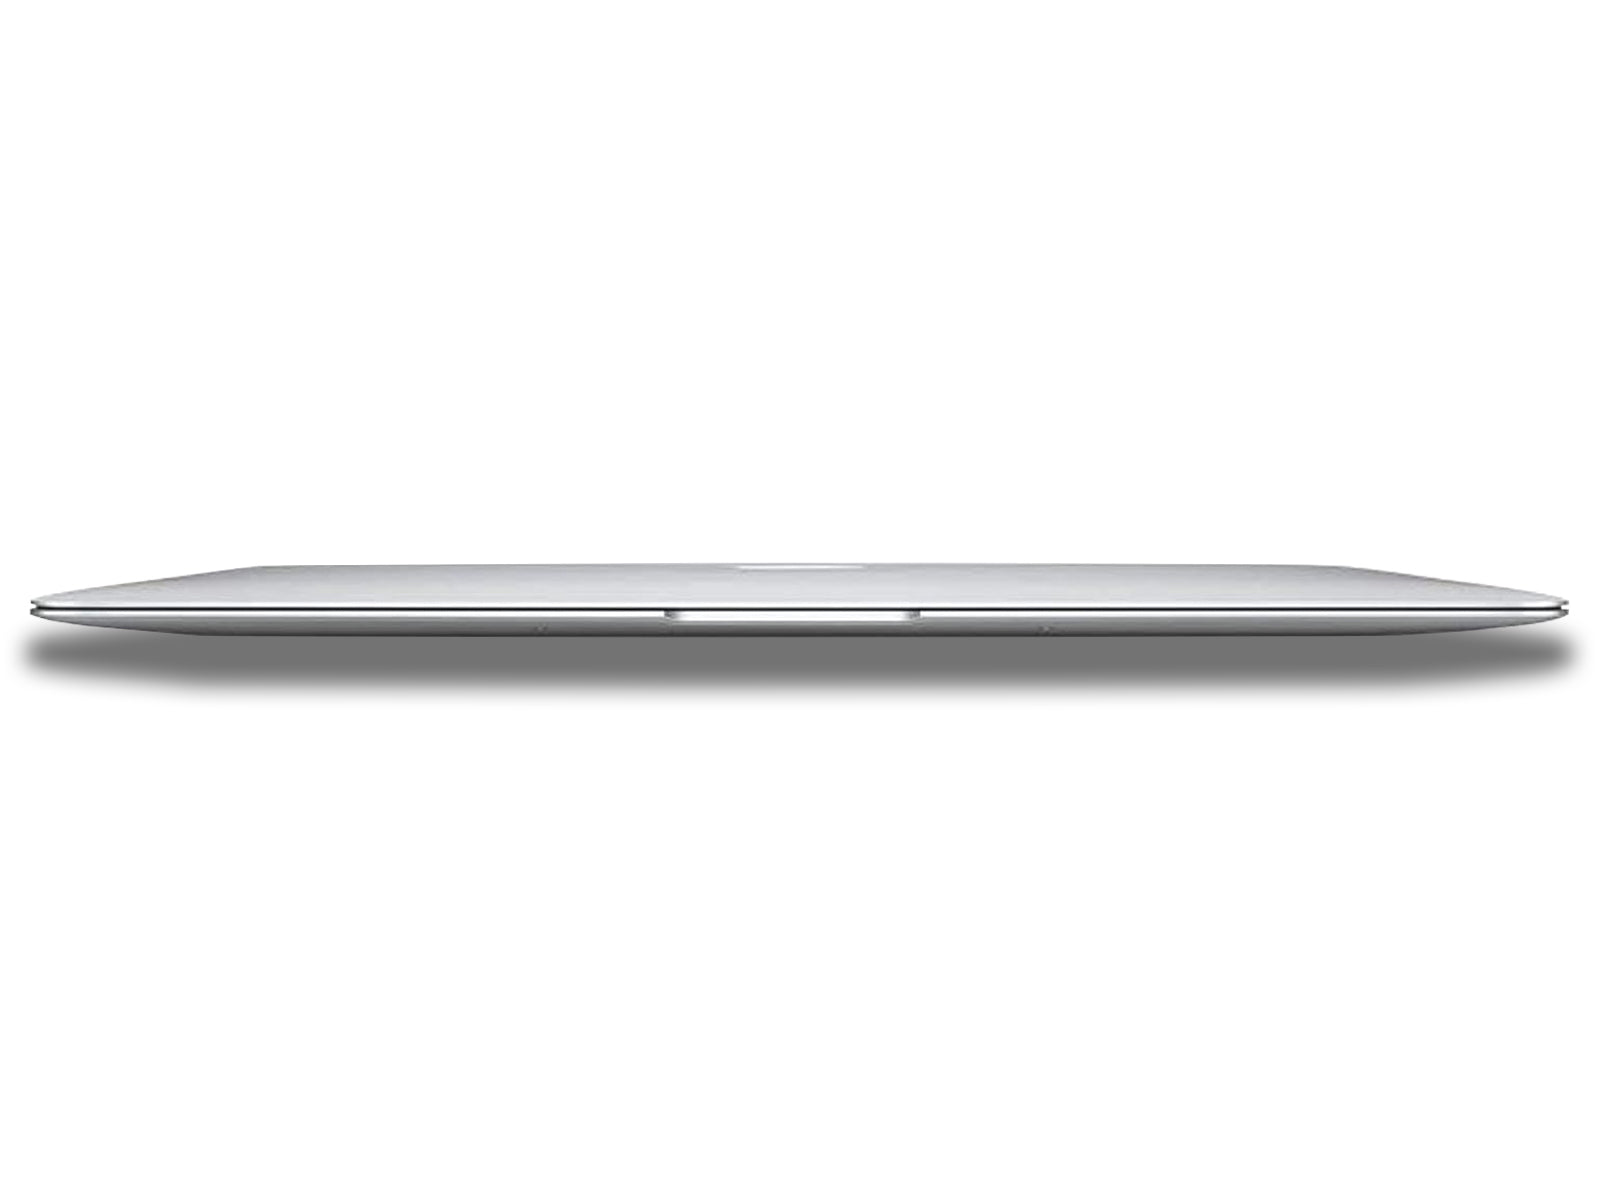 Apple MacBook Air Front View Closed